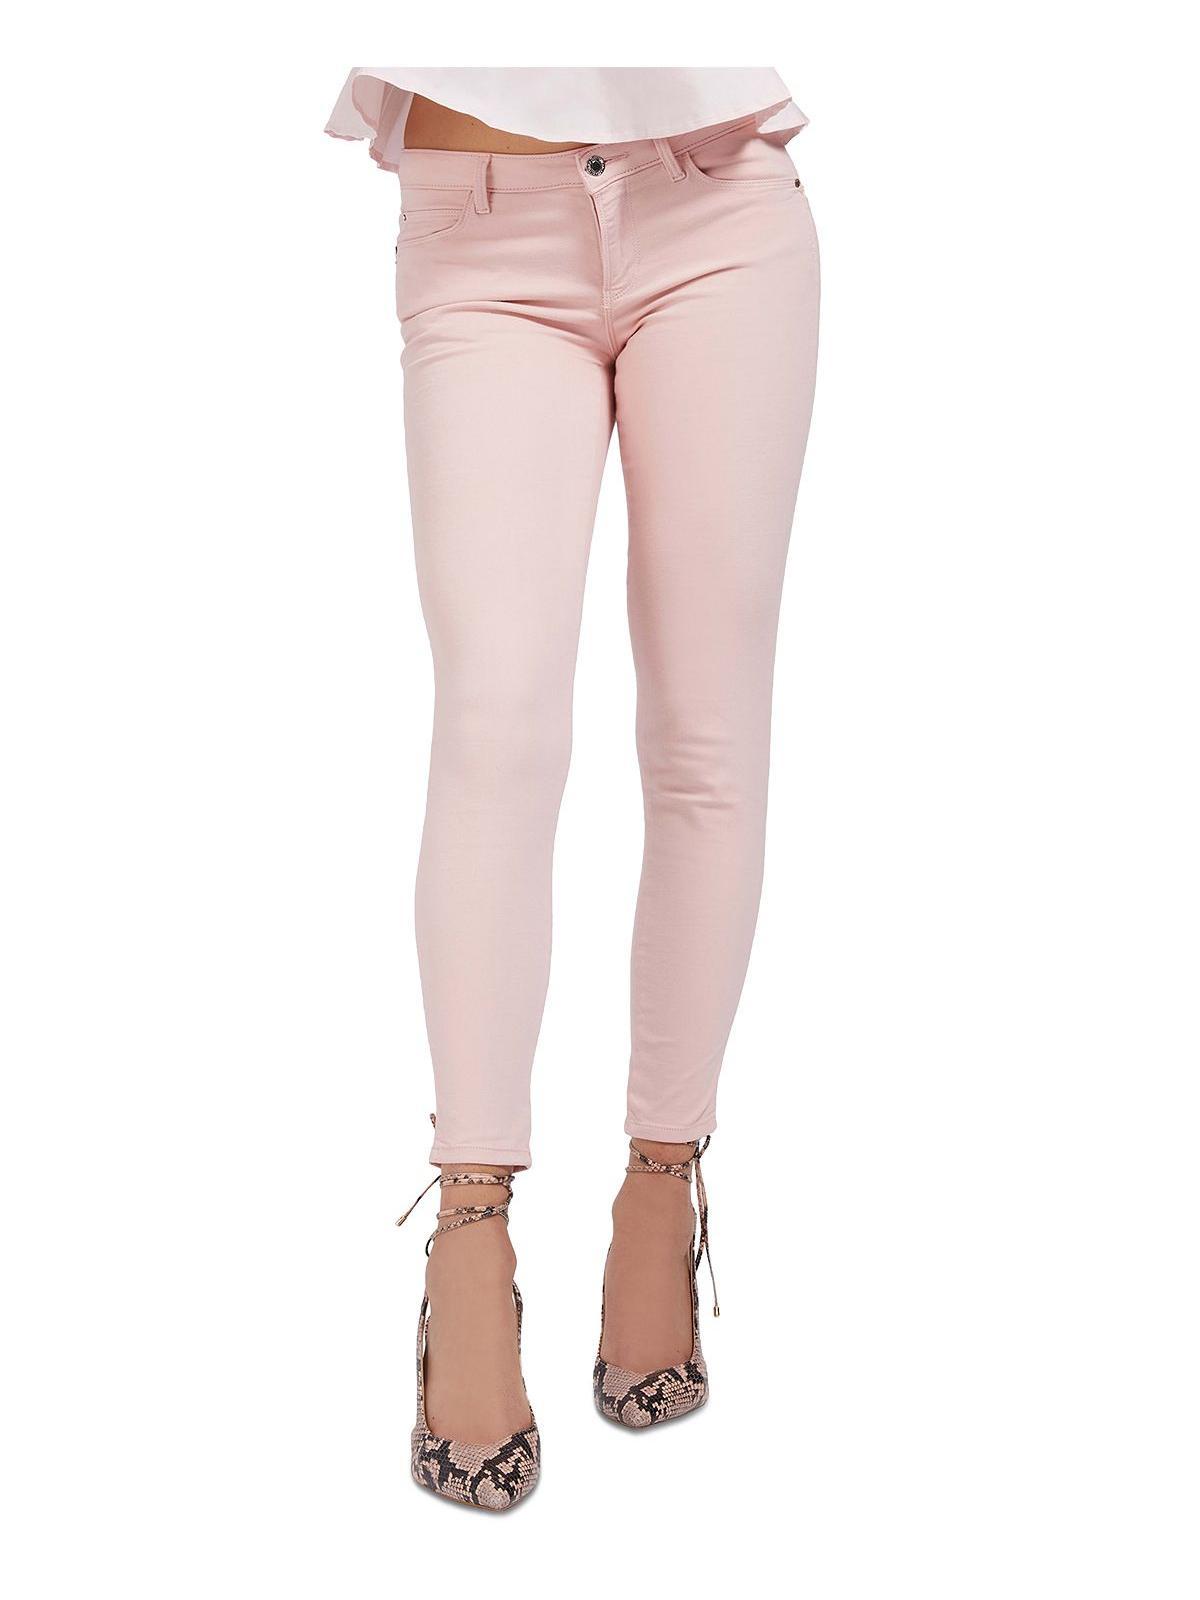 Guess Denim Curvy Colored Skinny Jeans in Pink | Lyst